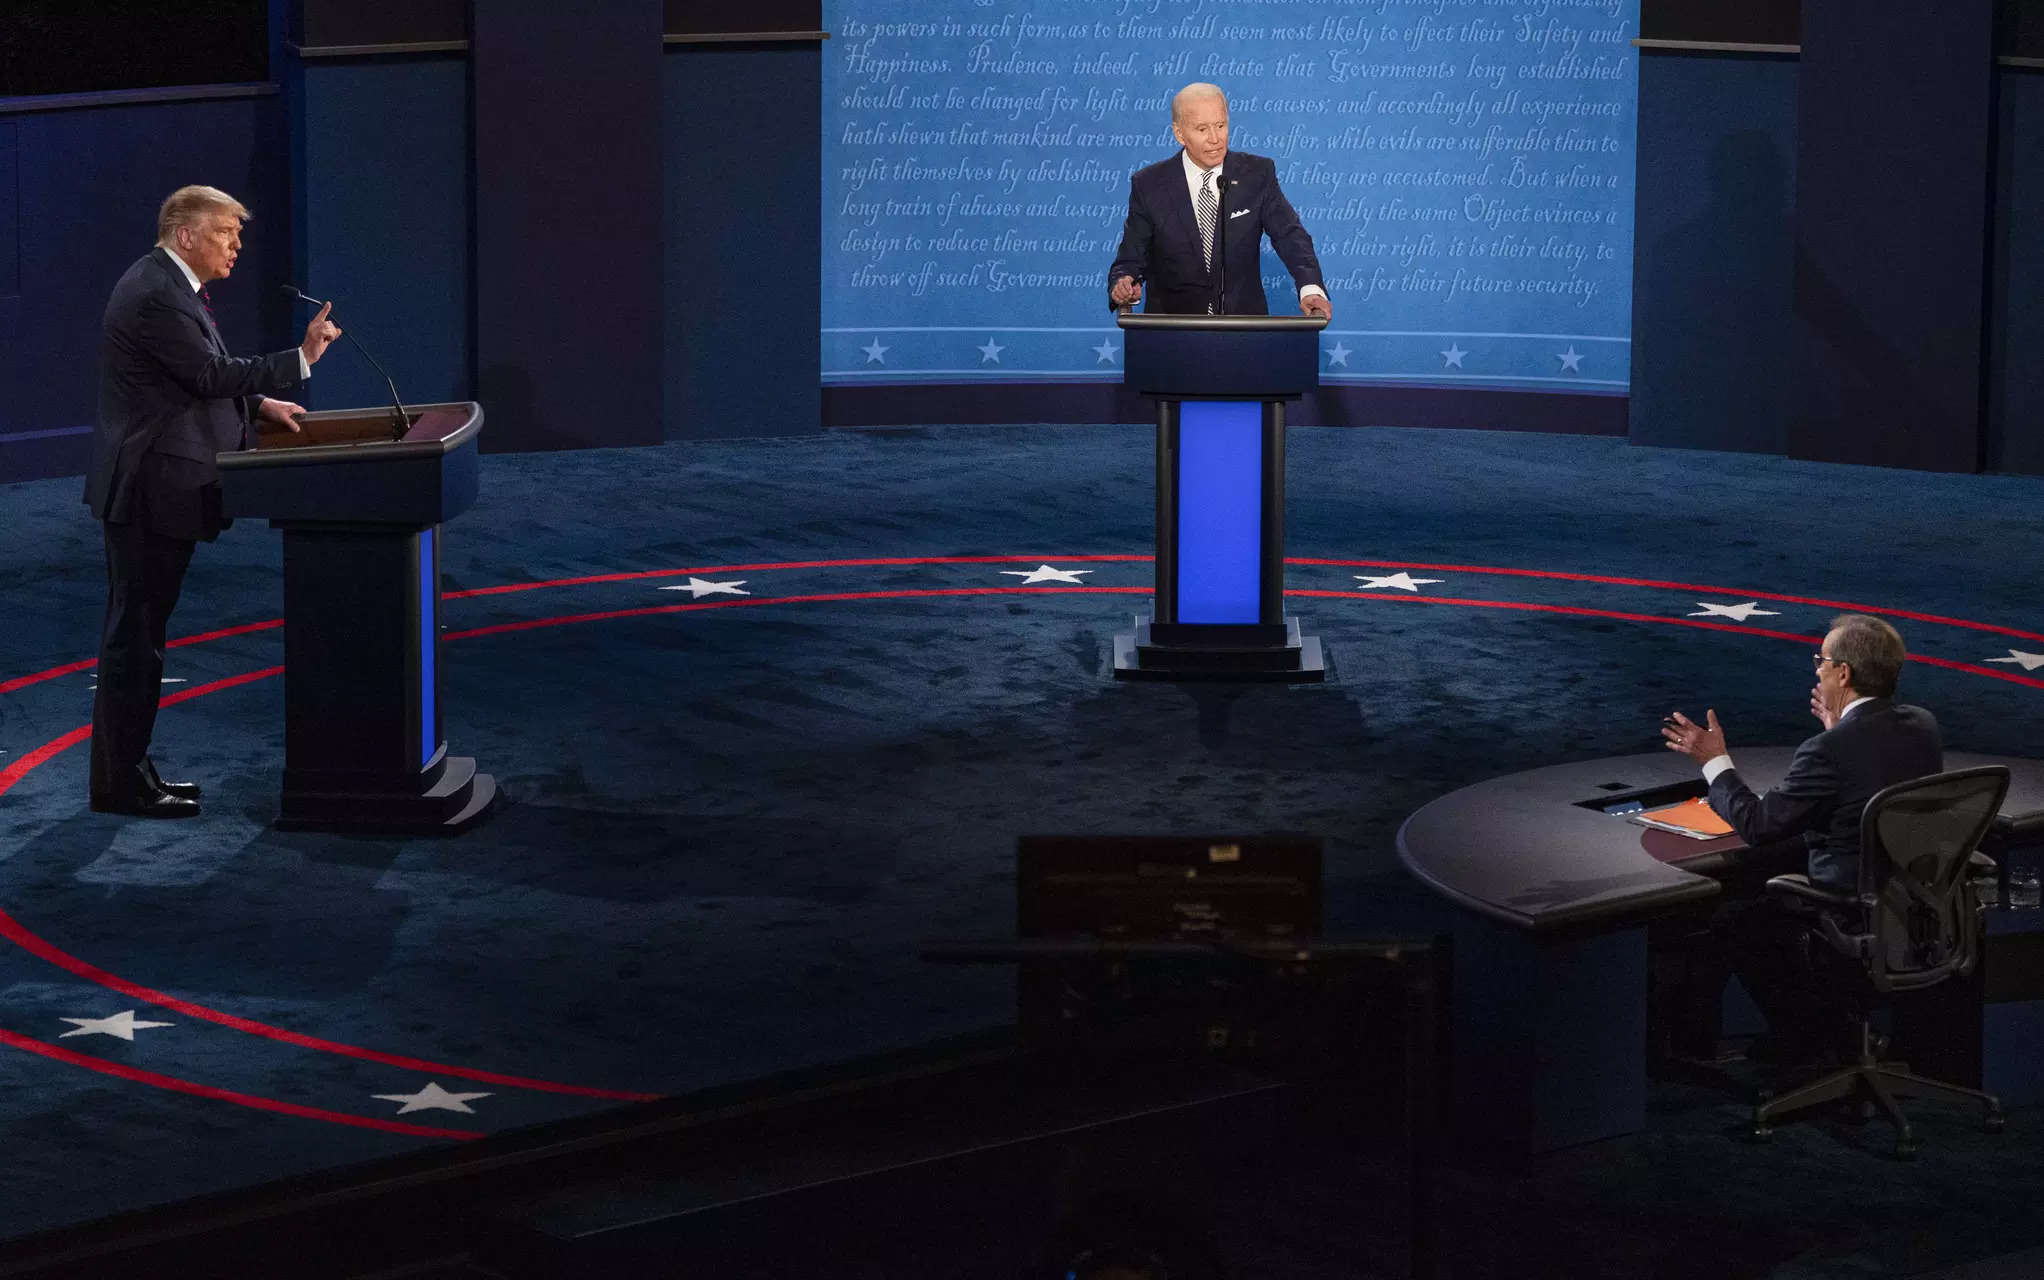 US Presidential Debate: Trump claims that Biden would be “pumped up” on drugs to hide his cognitive decline 